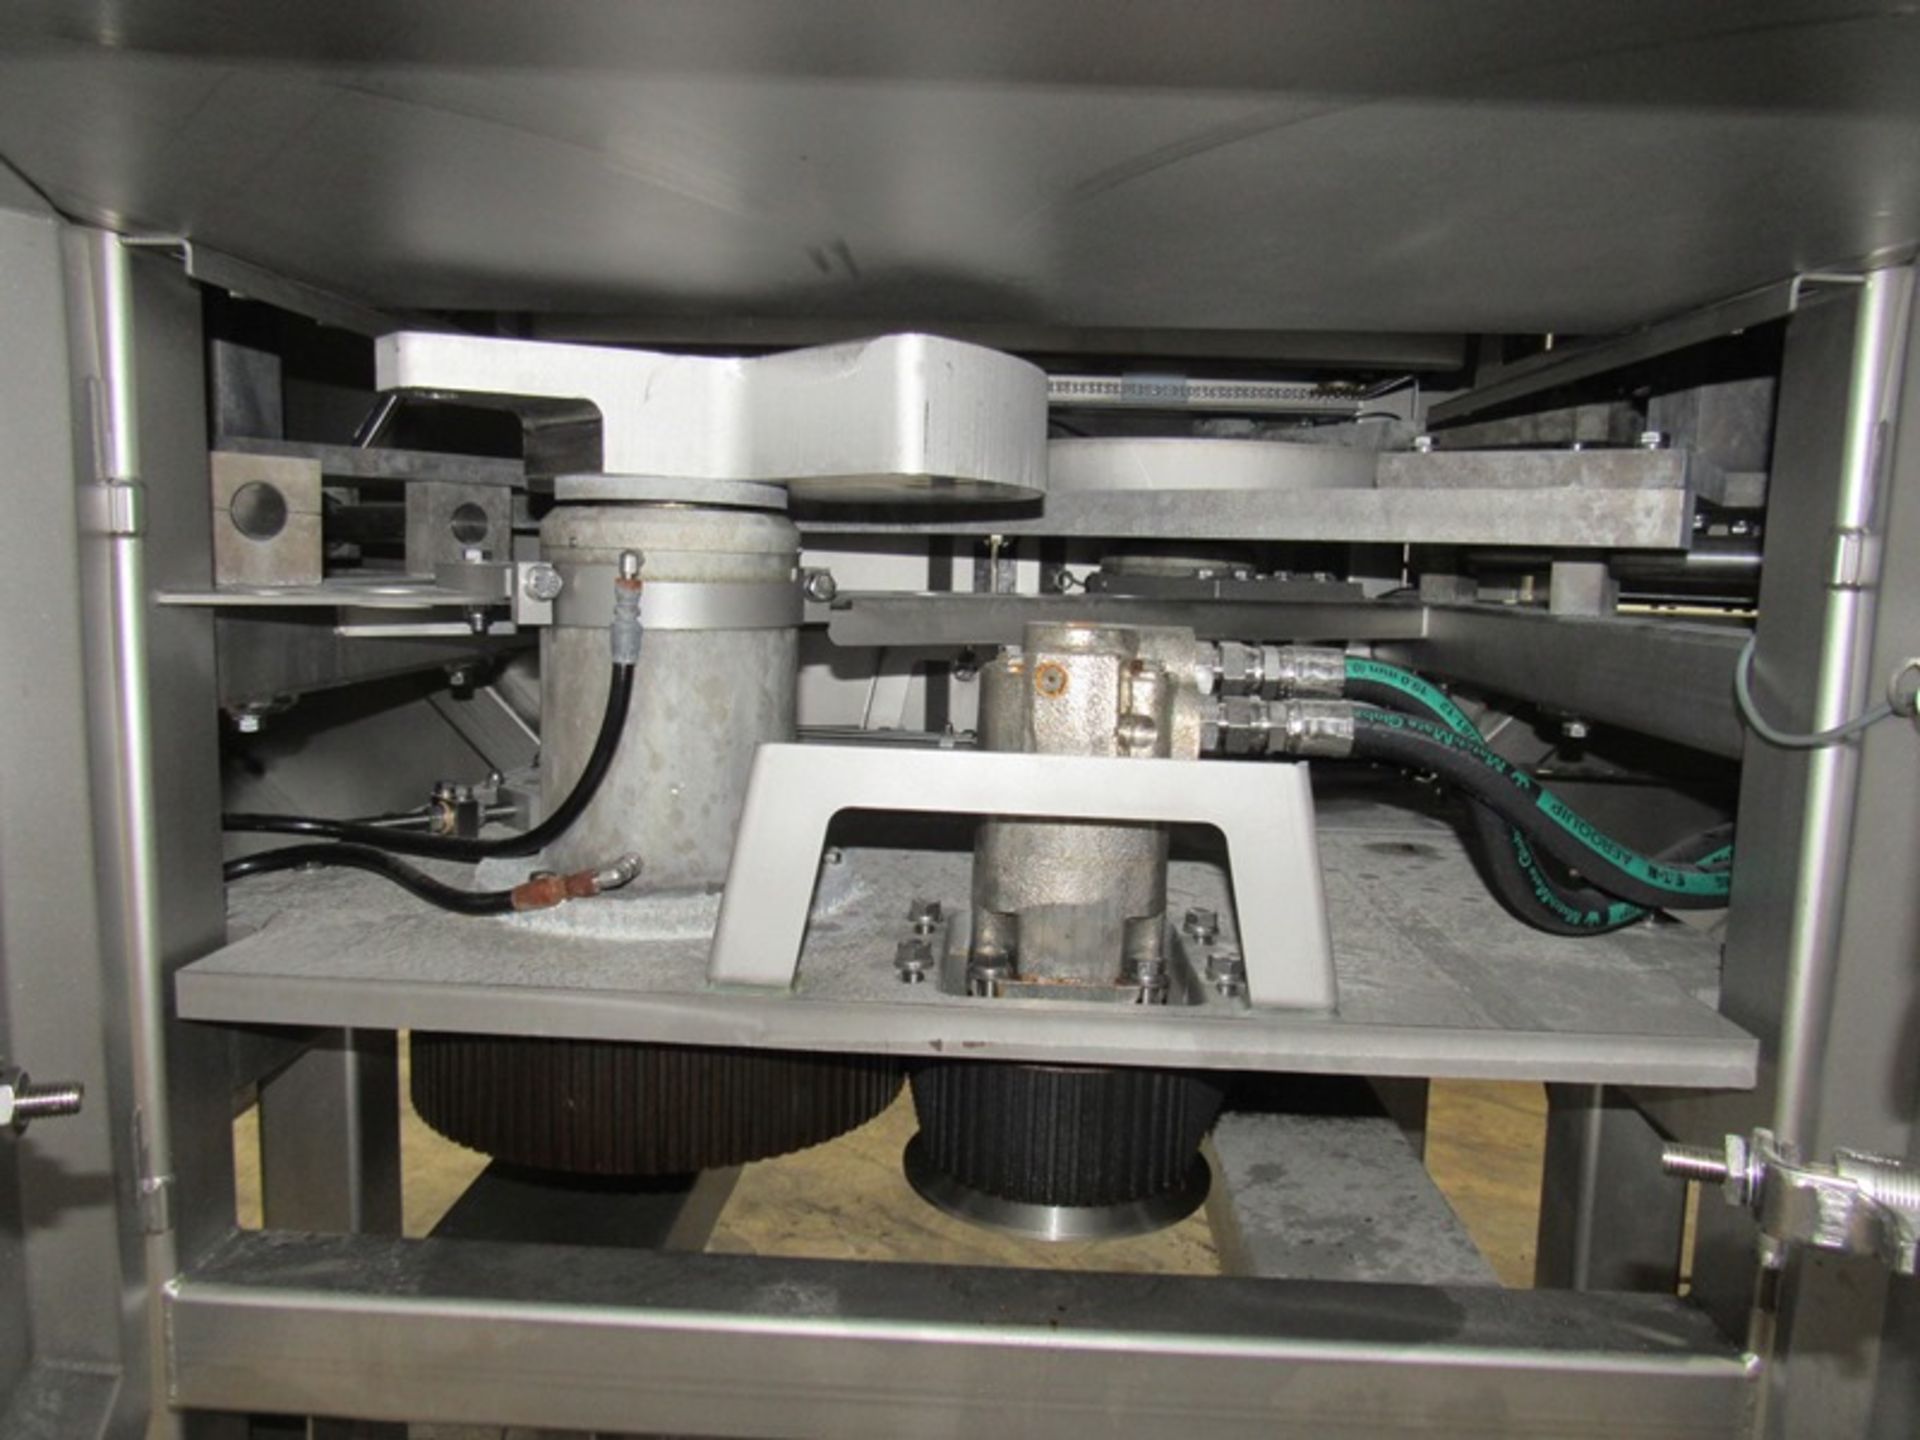 Ross Mdl. 990A Portion Slicer, Mfg. 2020, approx. new cost $288,000, (16) 3" dia. product feed tubes - Image 14 of 15